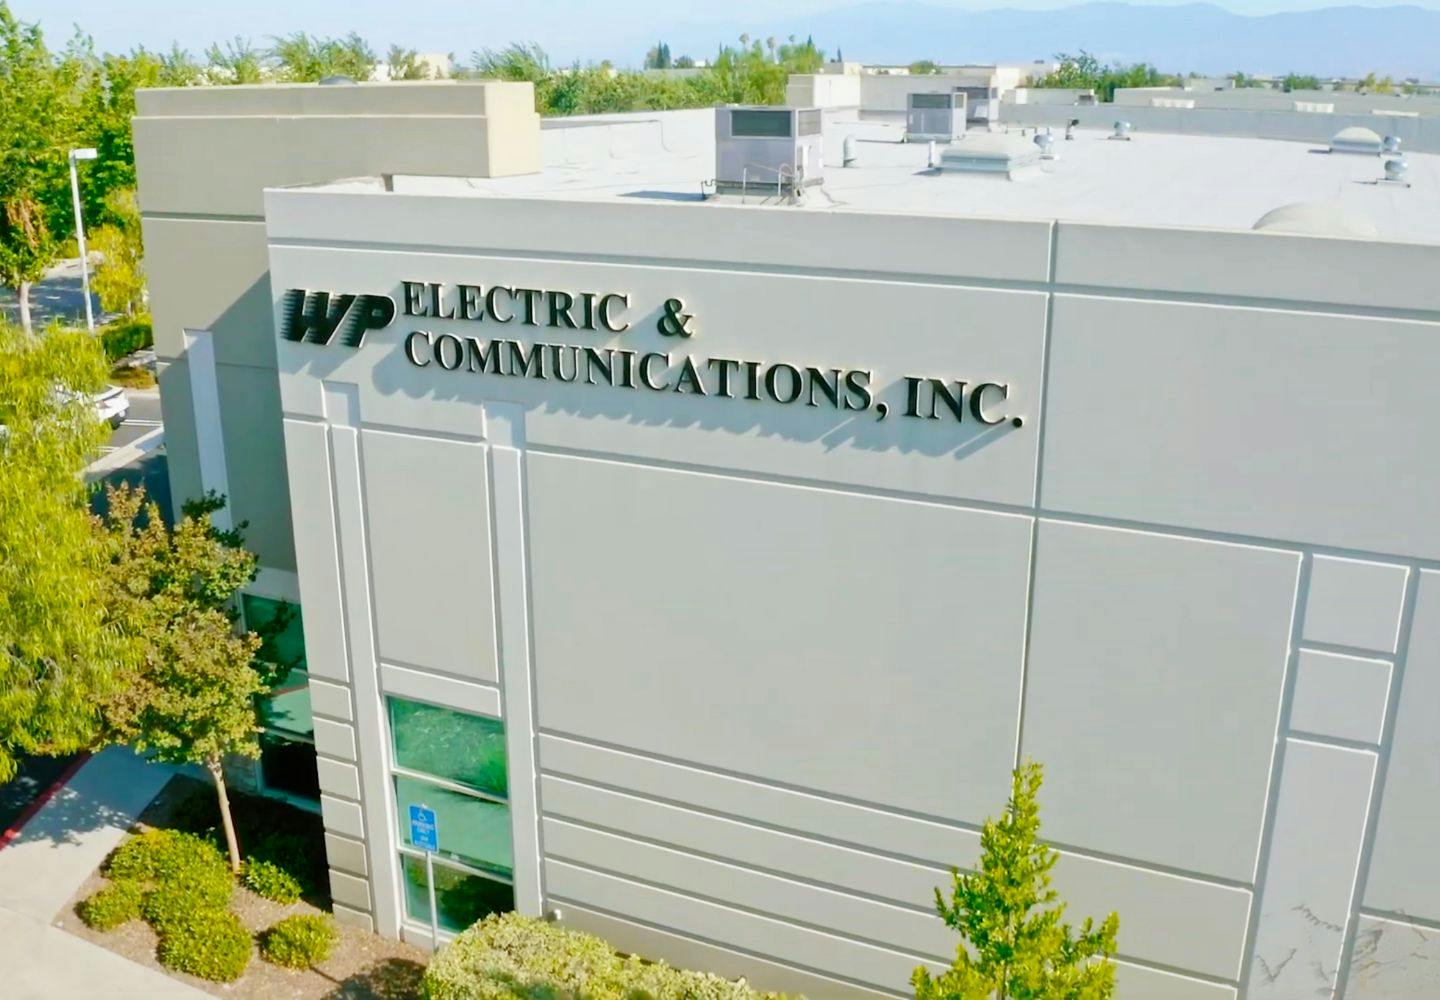 WP Electric and Communications